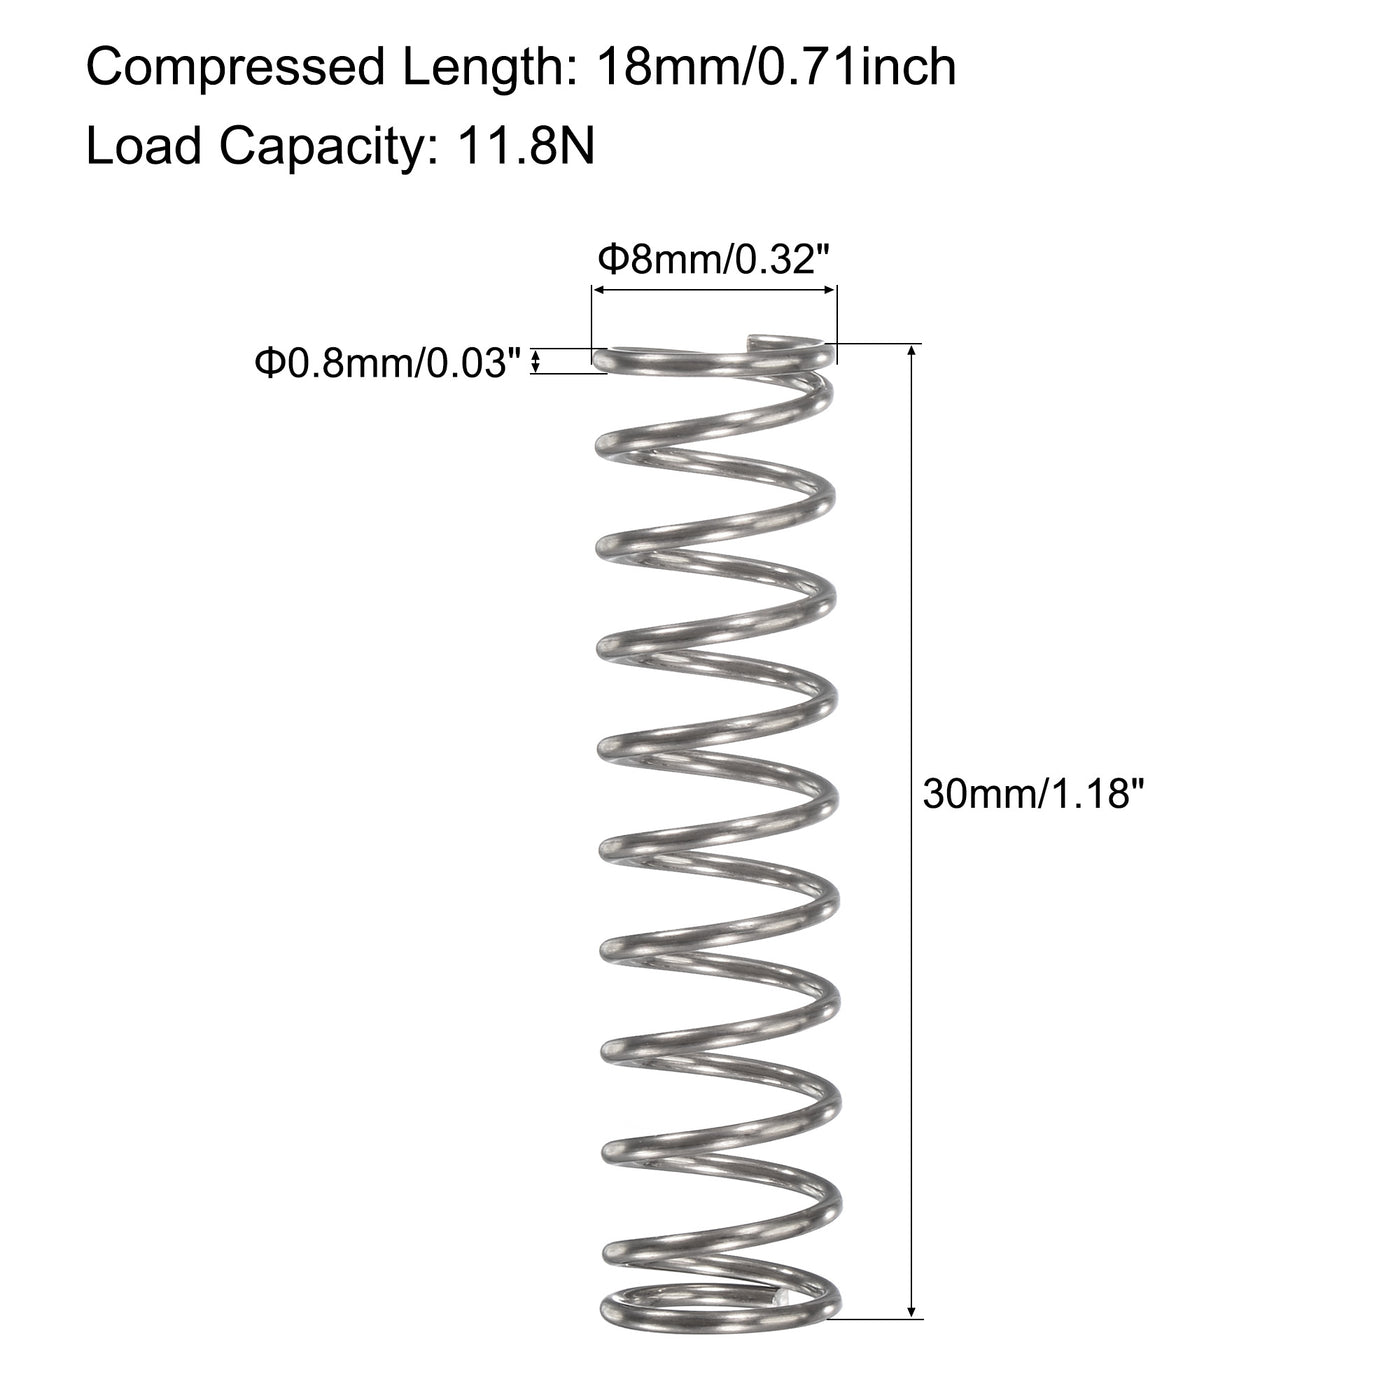 uxcell Uxcell 8mmx0.8mmx30mm 304 Stainless Steel Compression Spring 11.8N Load Capacity 30pcs